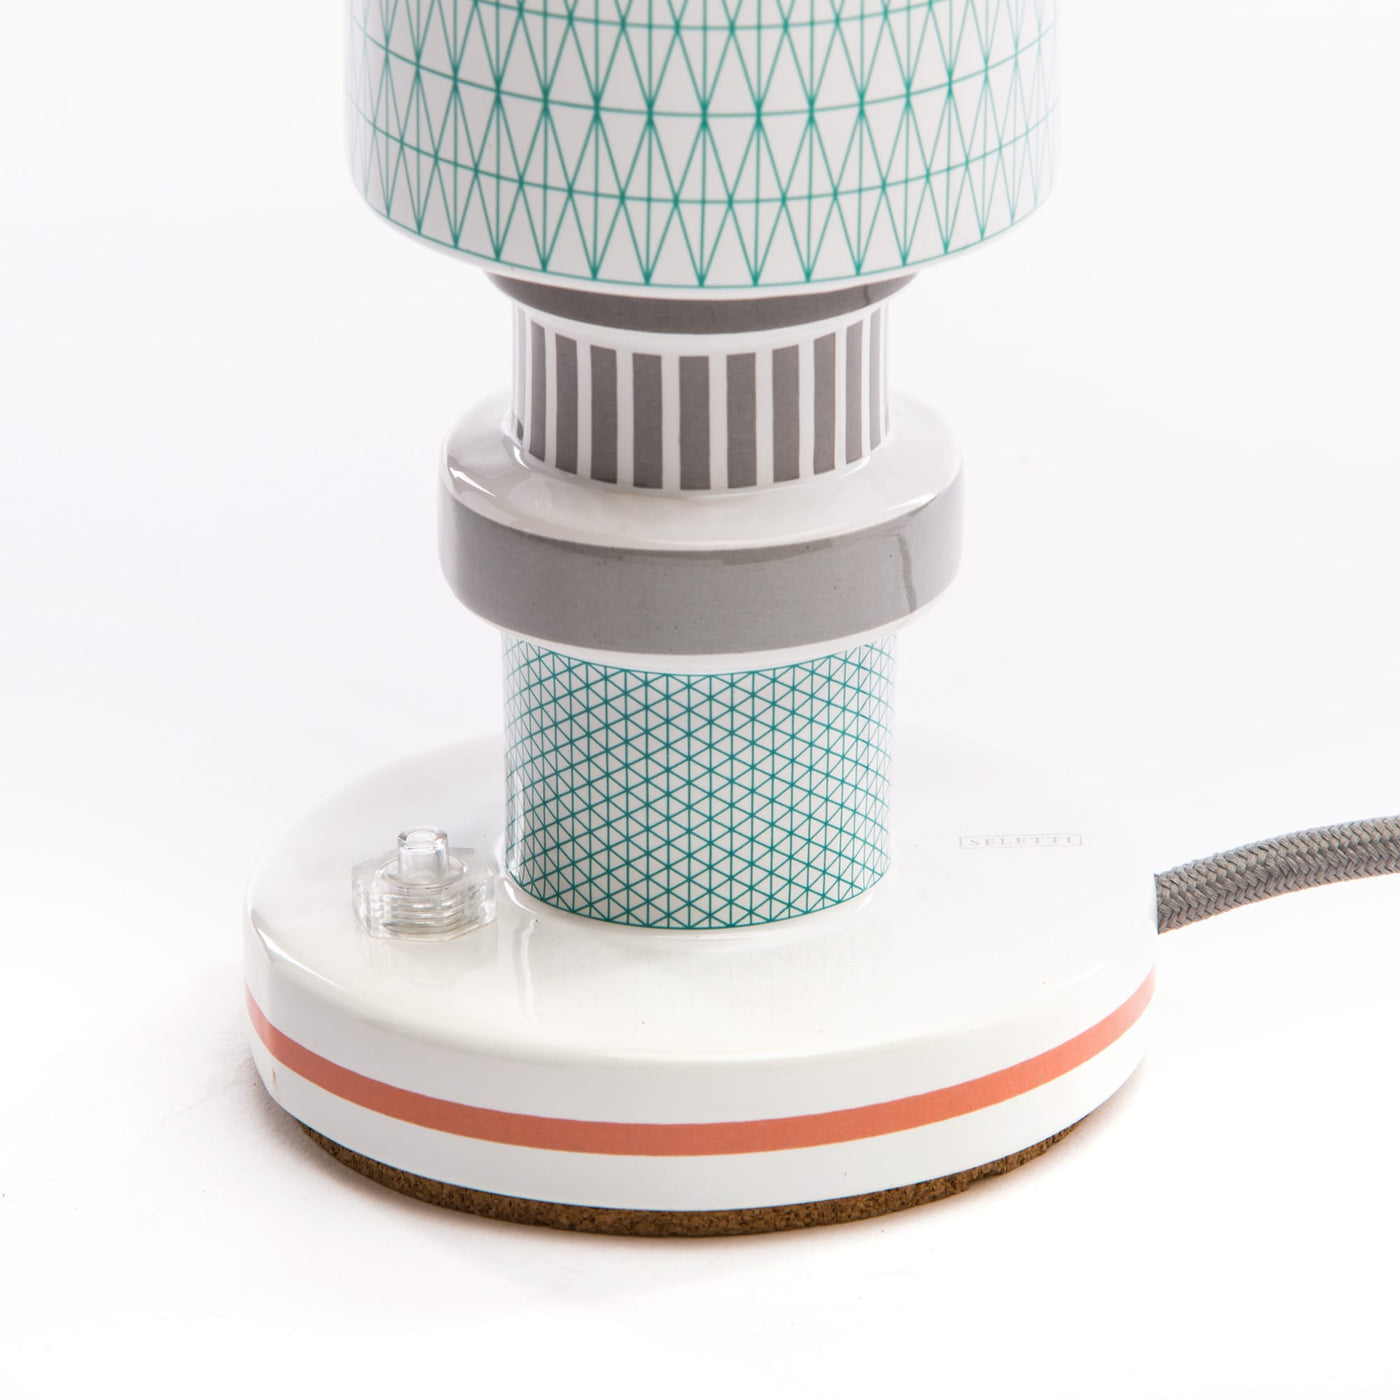 Moresque Table Lamp Design #1 – Turnot by Seletti